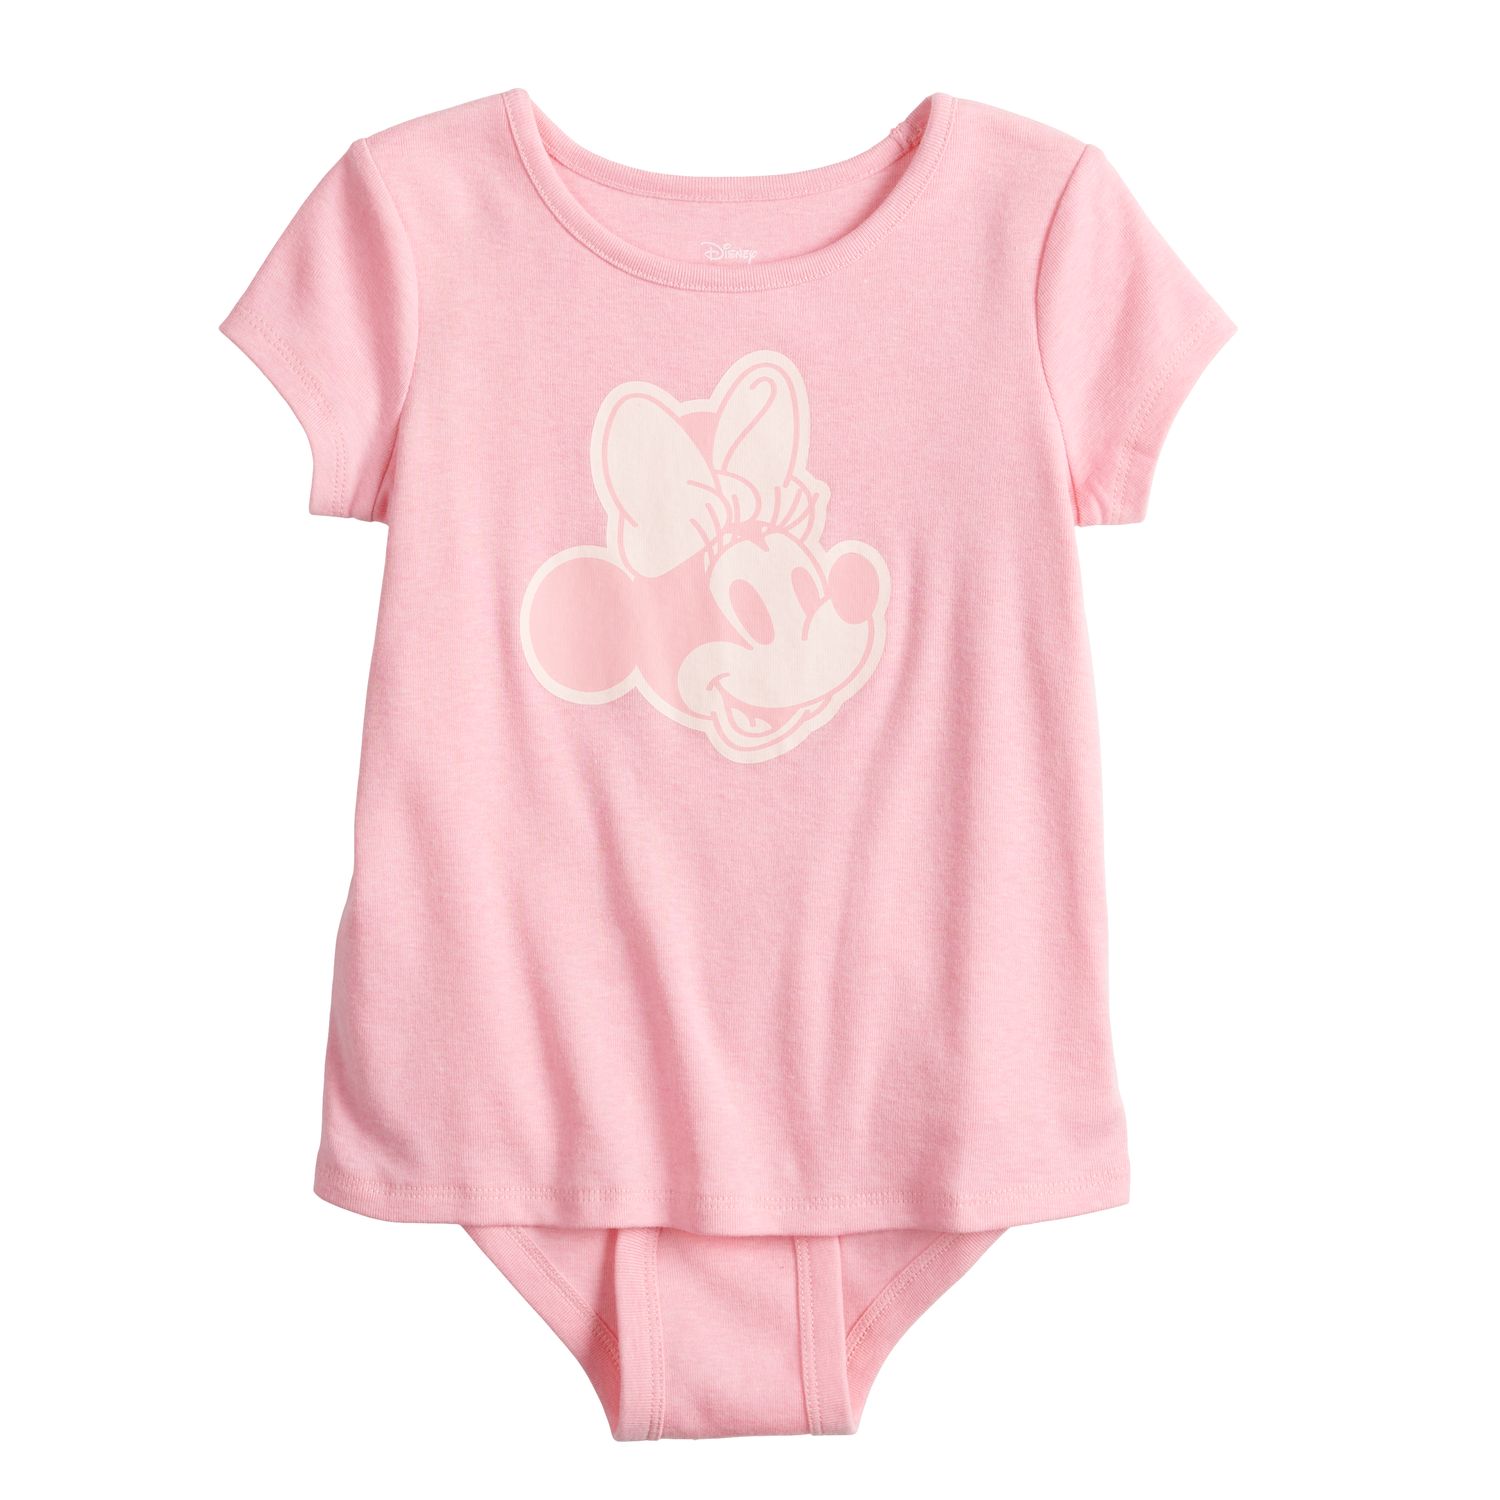 Image for Disney/Jumping Beans Disney's Minnie Mouse Girls 4-12 Adaptive Layered Bodysuit by Jumping Beans® at Kohl's.